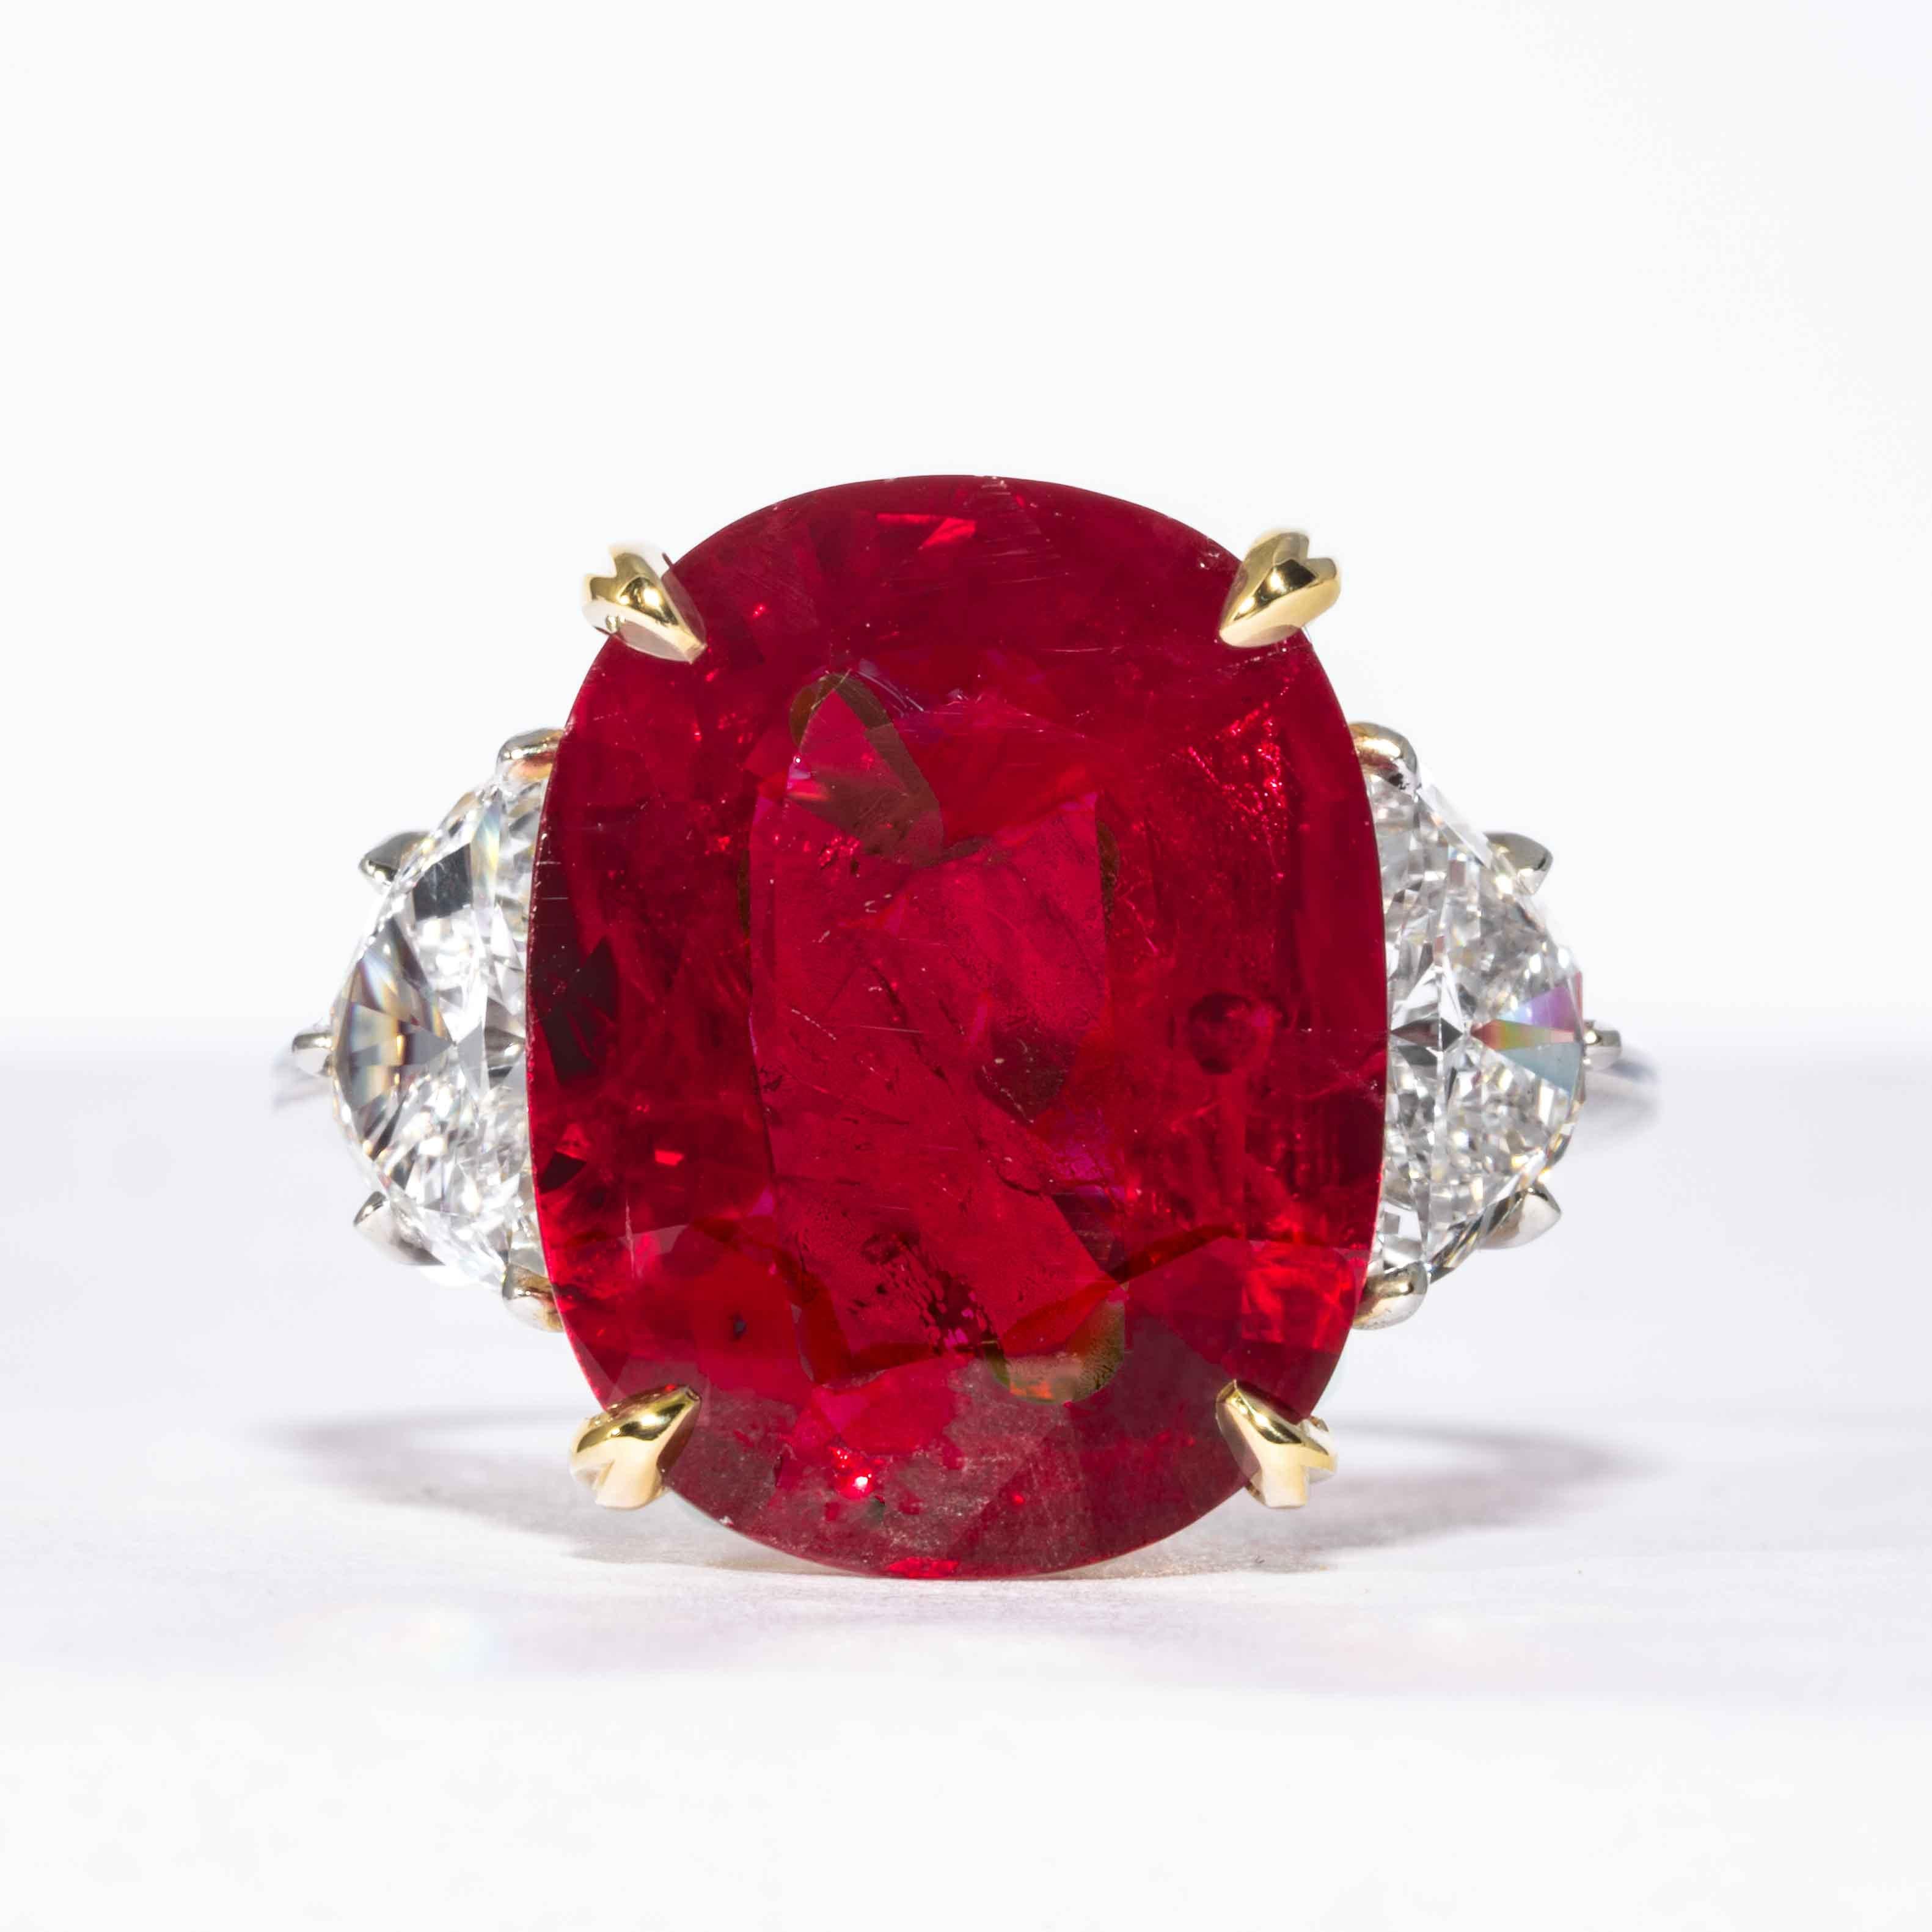 This ruby and diamond 3-stone ring is offered by Shreve, Crump & Low.  This 